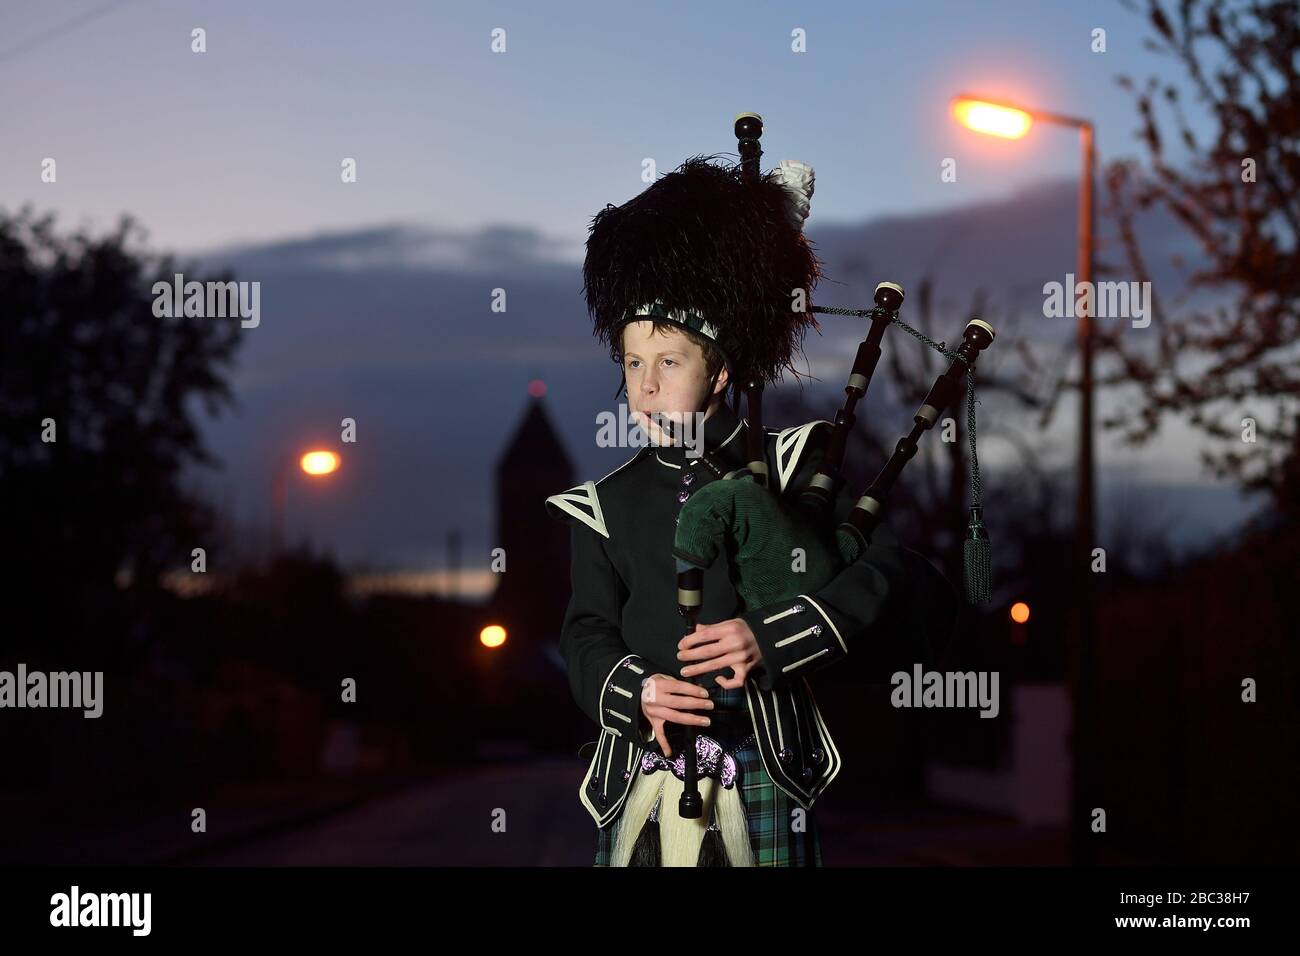 George Orchin (12), a piper in the Campbell College Pipe Band, plays Scotland the Brave outside his neighbour's house in East Belfast, Northern Ireland, during a second Thursday night of 'Clap for our Carers' as people across the country showed their appreciation for all NHS workers who are helping to fight the coronavirus. Stock Photo